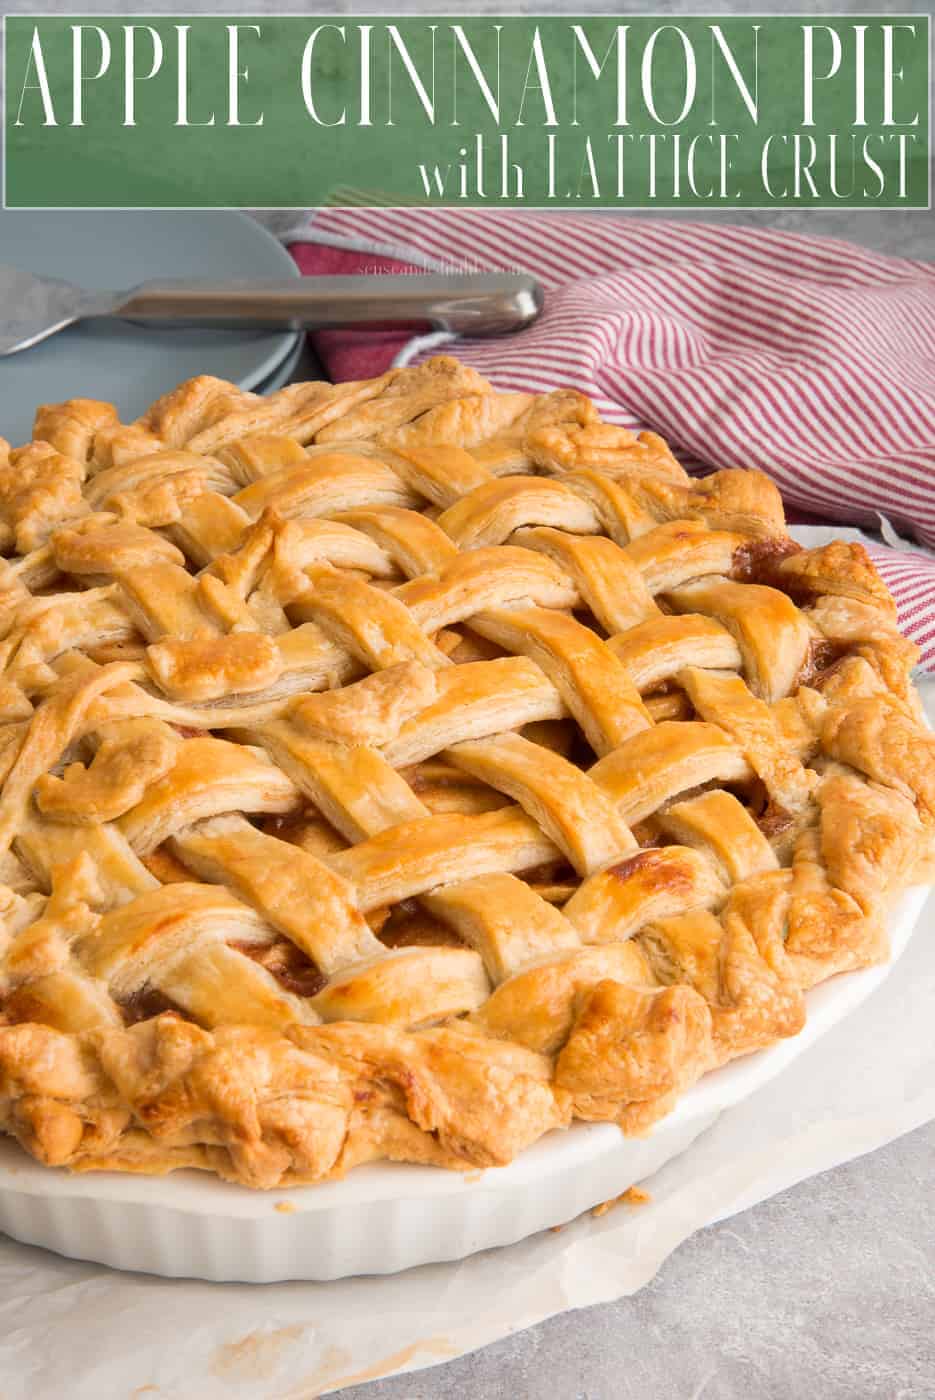 Apple Cinnamon Pie with Lattice Crust is easier to make than you might think. The spiced apple pie filling can be made ahead and my easy to follow instructions make a beautiful lattice crust achievable. Freezer friendly, so you can always have an apple pie ready to go. #applecinnamon #applepie #piedough #holidaypie #holidaypierecipe #pierecipe #baking #bakers #holidaybaking #easypierecipe #grannysmith #thanksgiving #christmas #dessert #latticecrust via @ediblesense